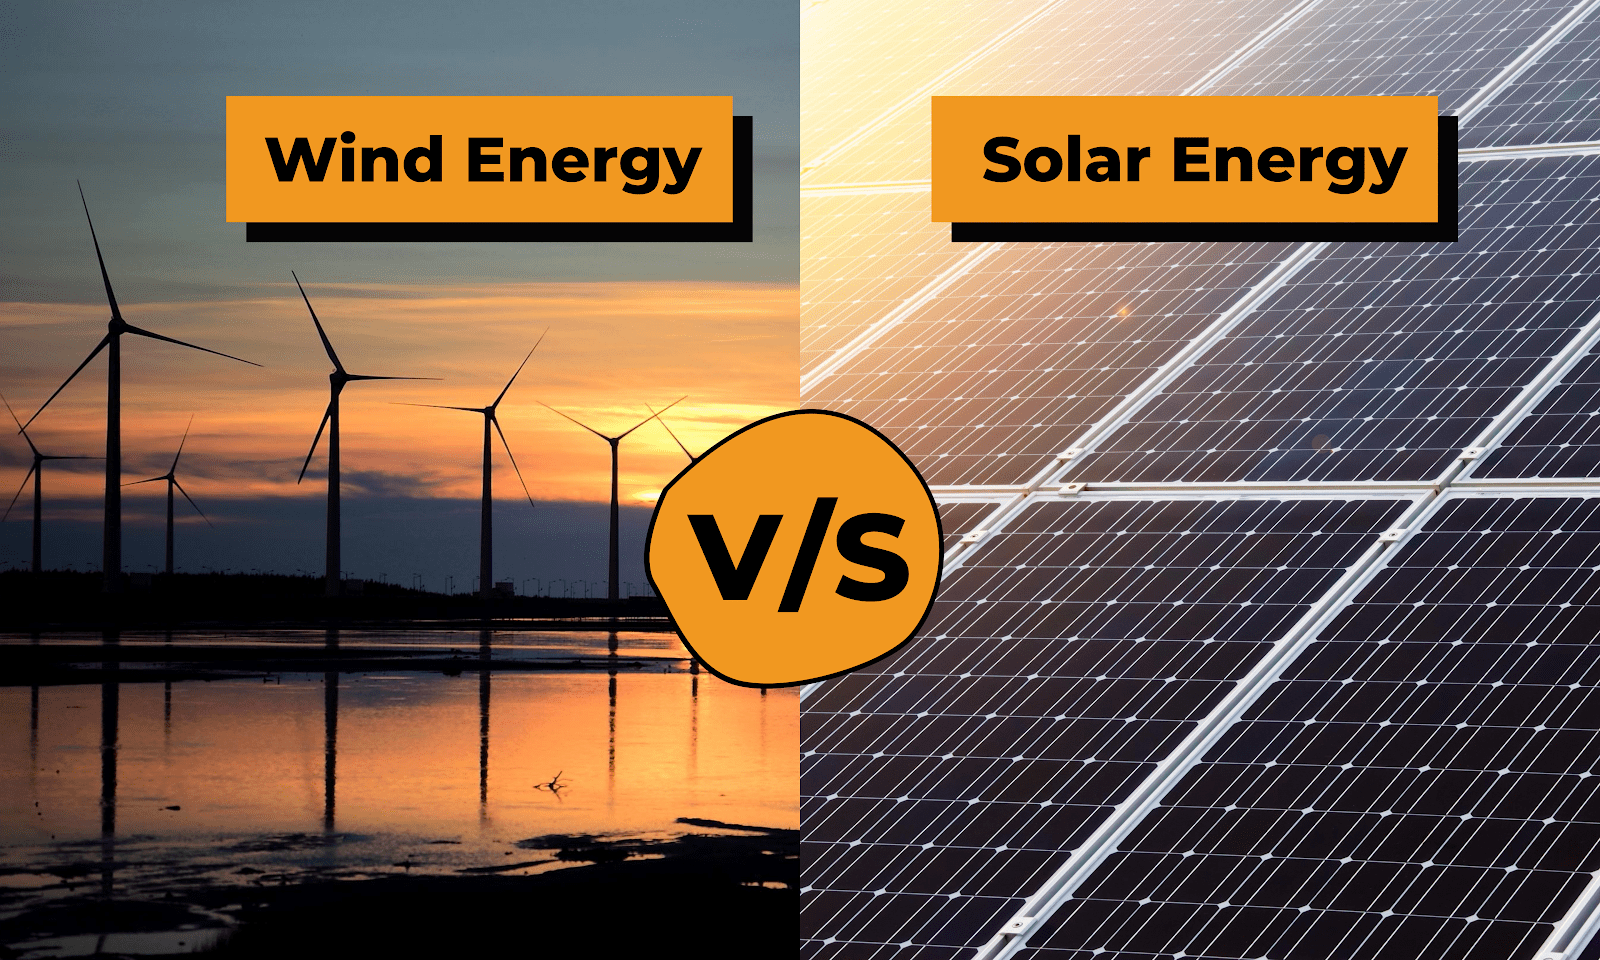 Solar vs Wind Energy: Which one is better?